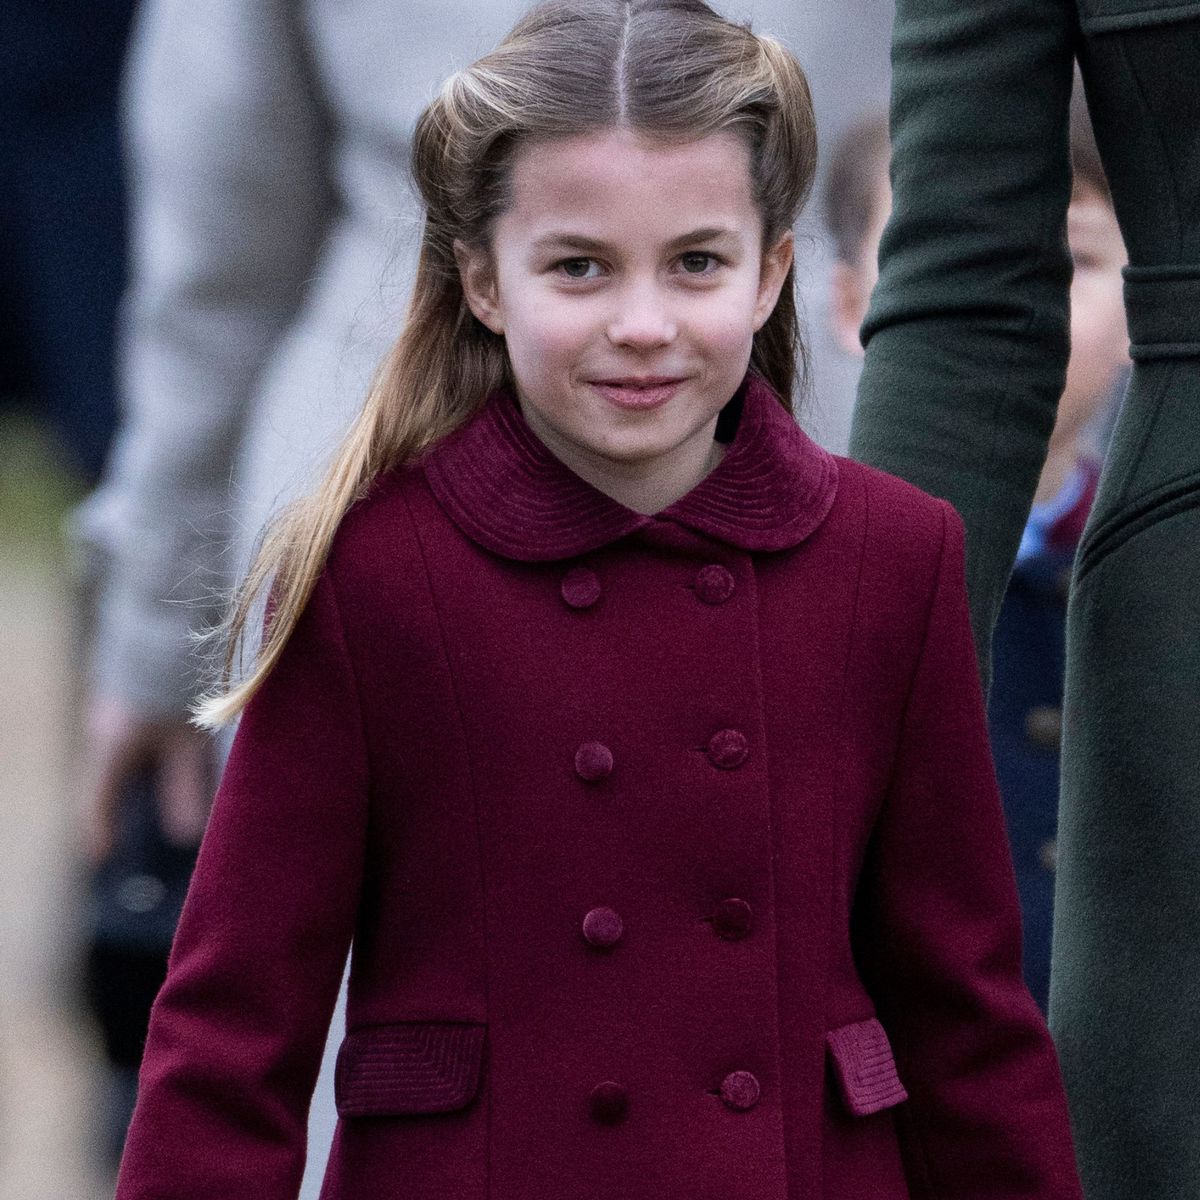  Princess Charlotte just gave this retro garden furniture trend the royal seal of approval 